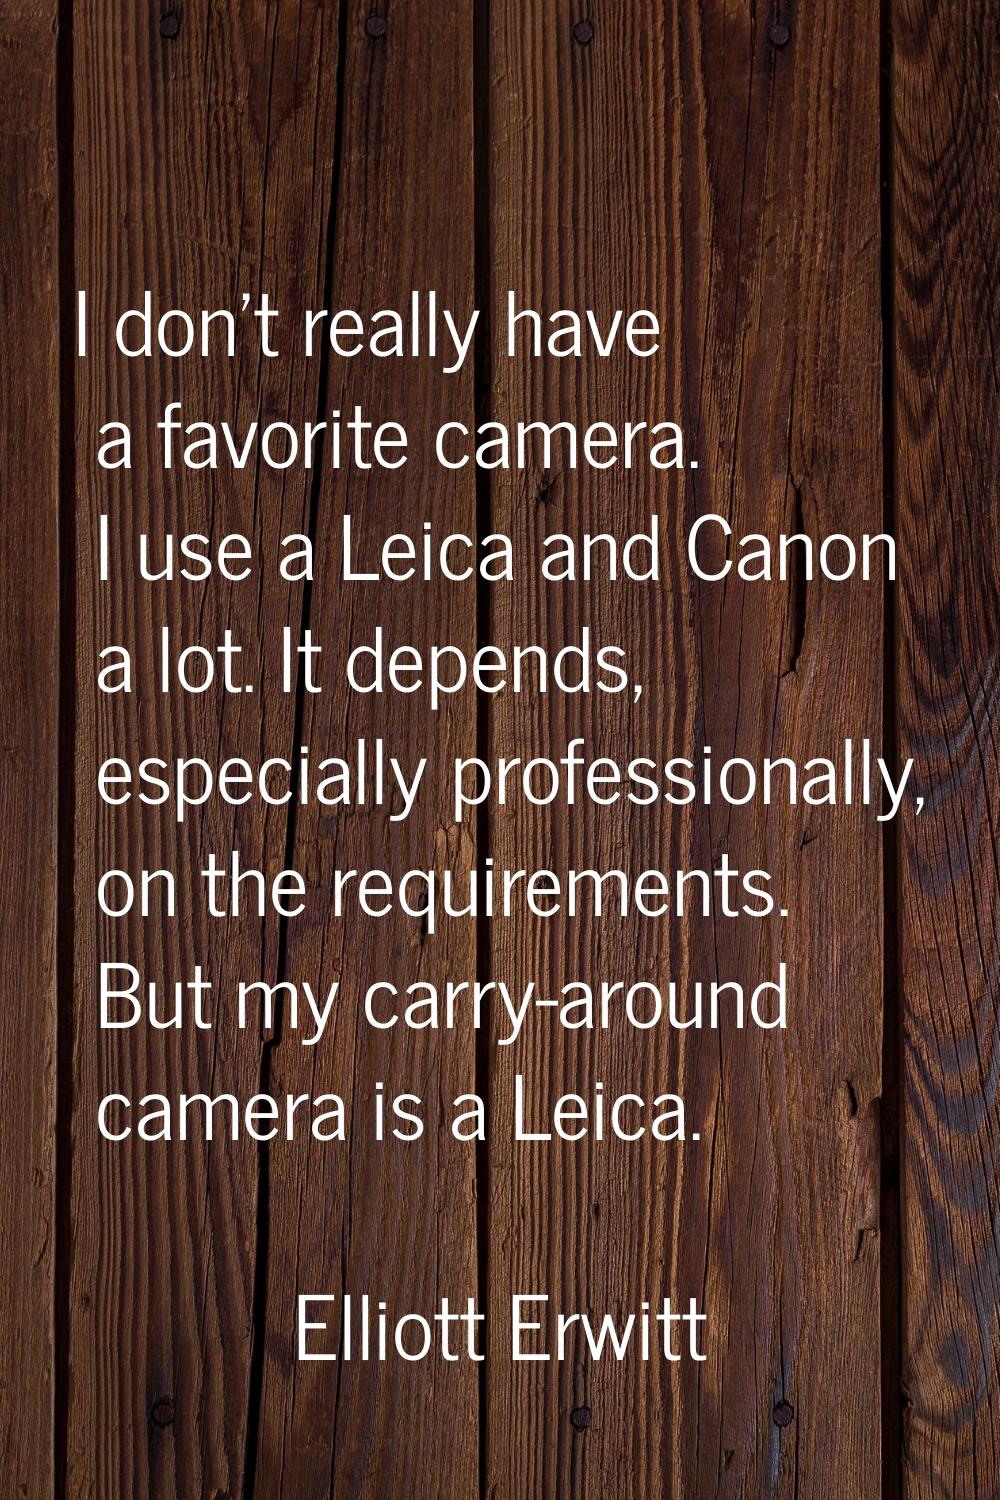 I don't really have a favorite camera. I use a Leica and Canon a lot. It depends, especially profes